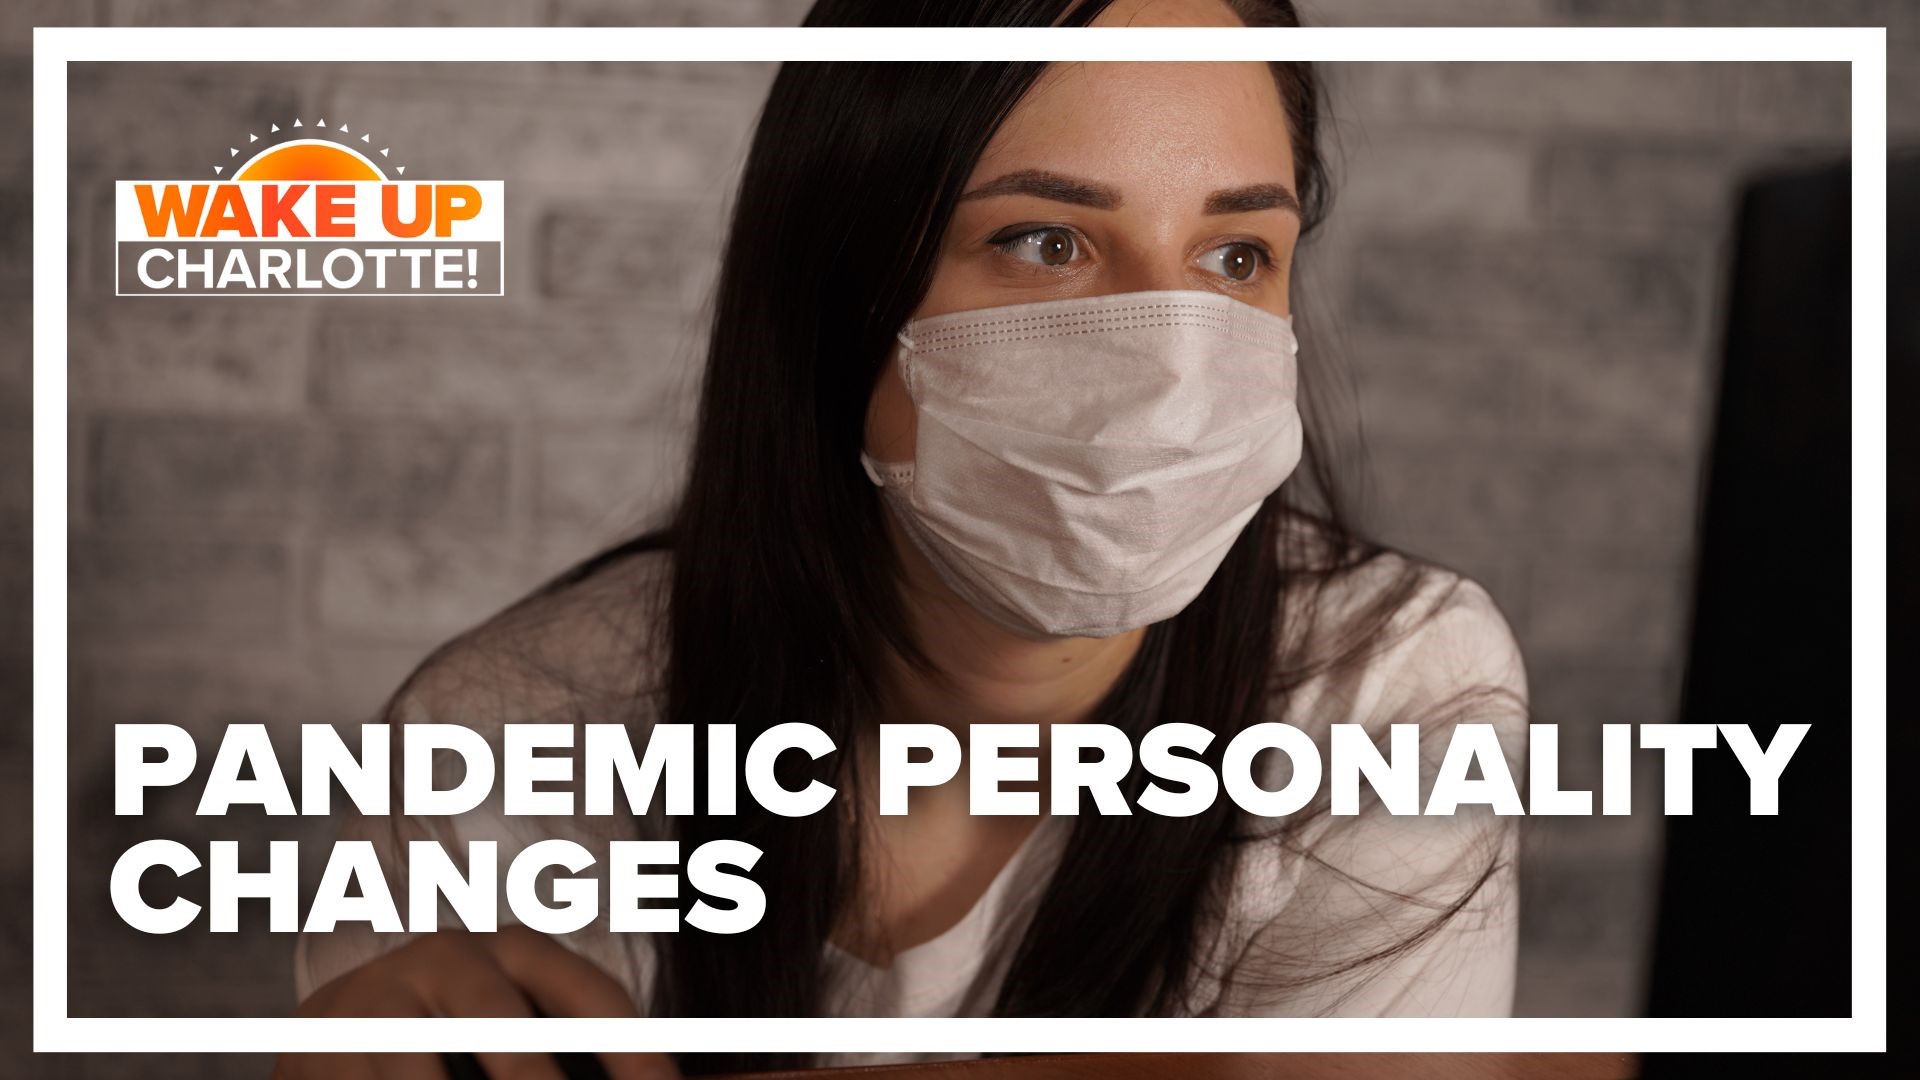 The pandemic changed many lives around the world, but now researchers say it also changed our personalities.